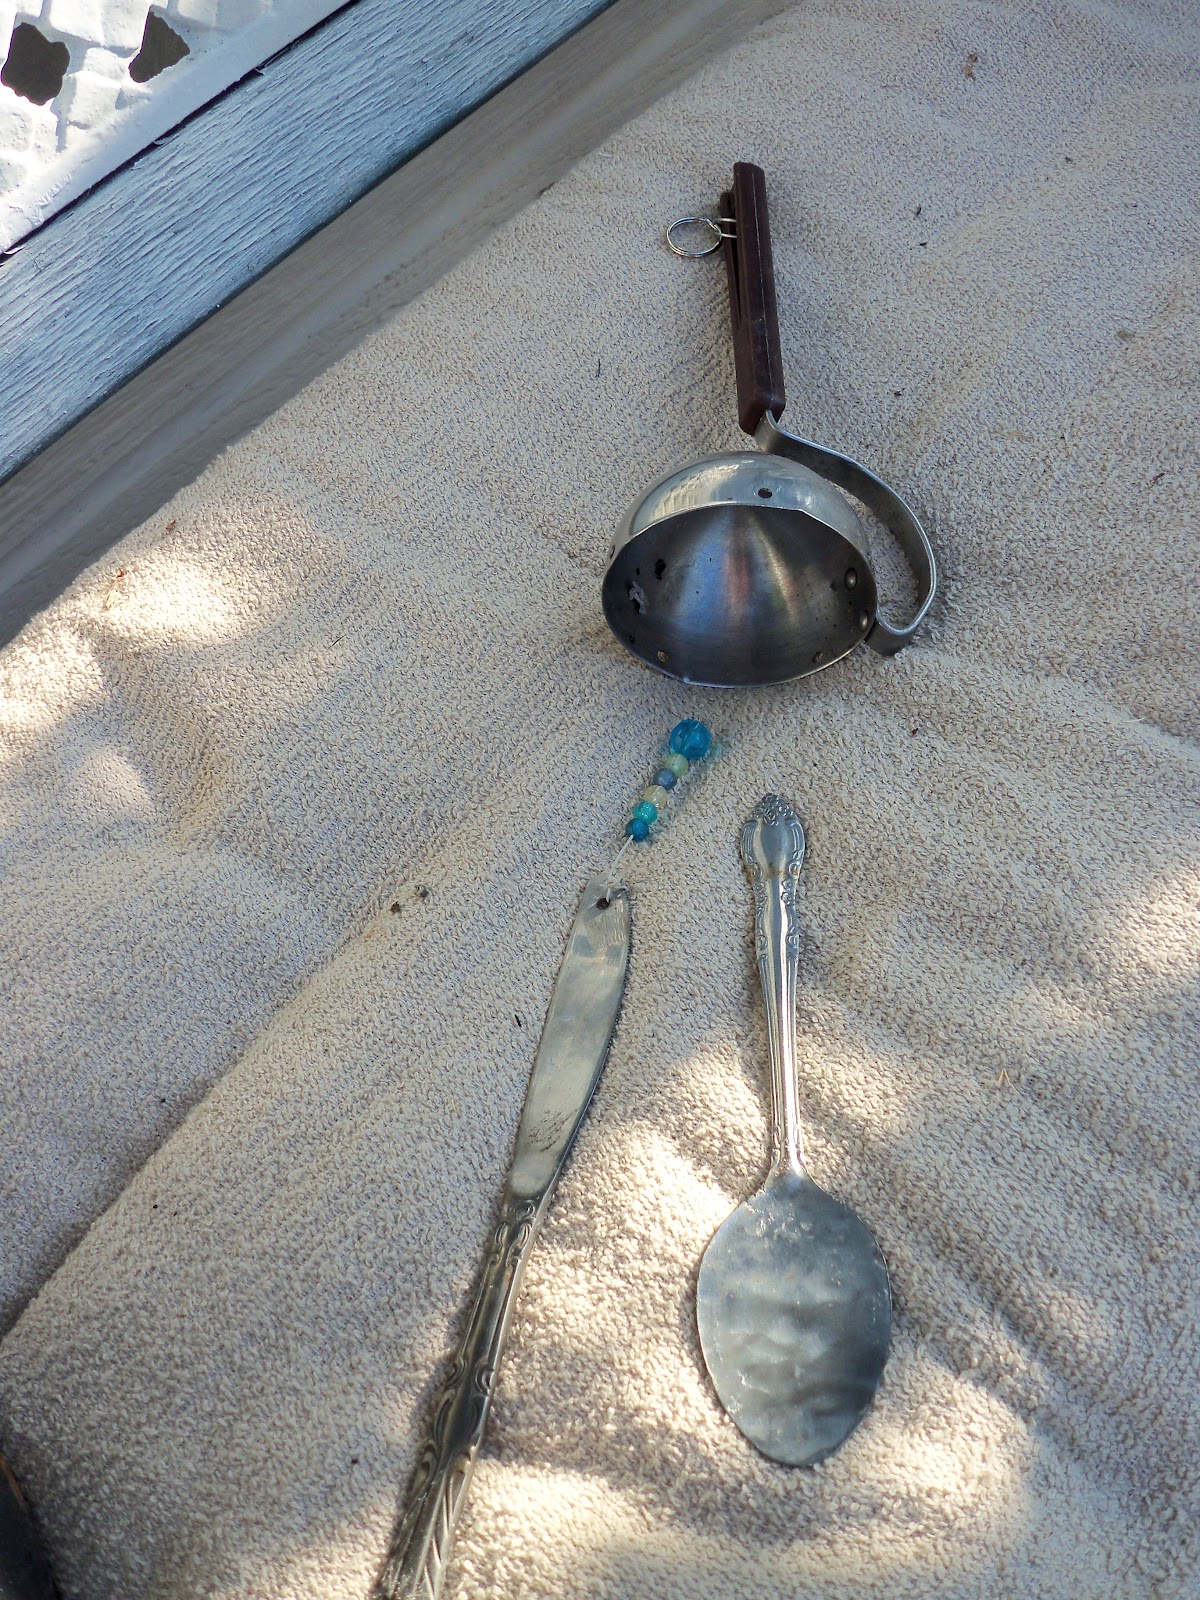 Make The Best of Things: Wind Chime Rescue